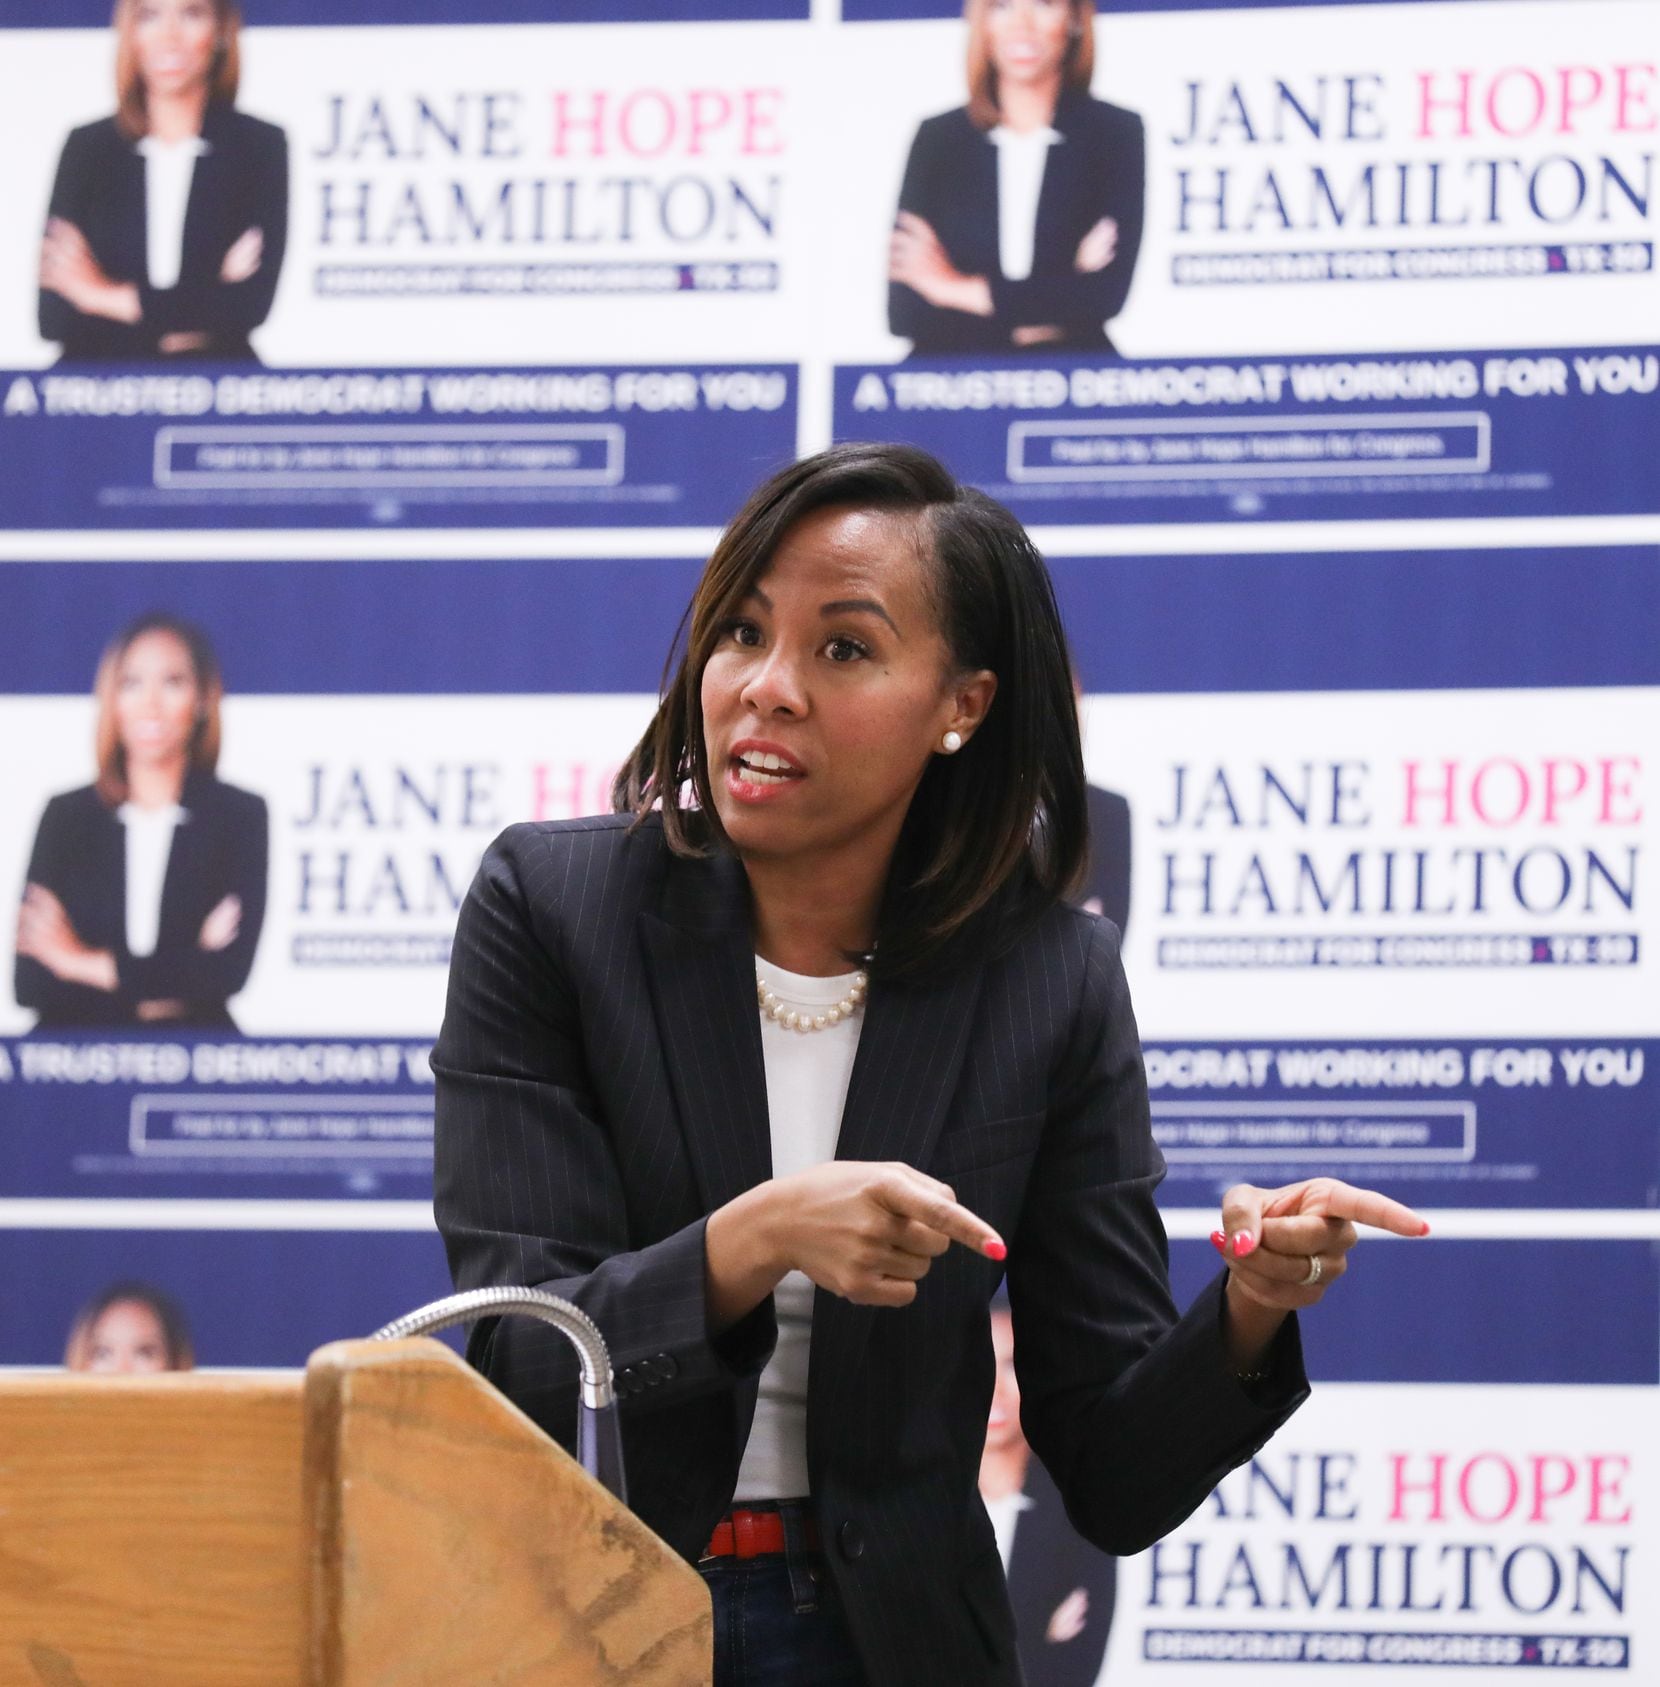 Jane Hamilton, candidate for the District 30 race, speaks at her town hall at the Duncanville Recreation Center in Duncanville, Texas, on February 8, 2022.